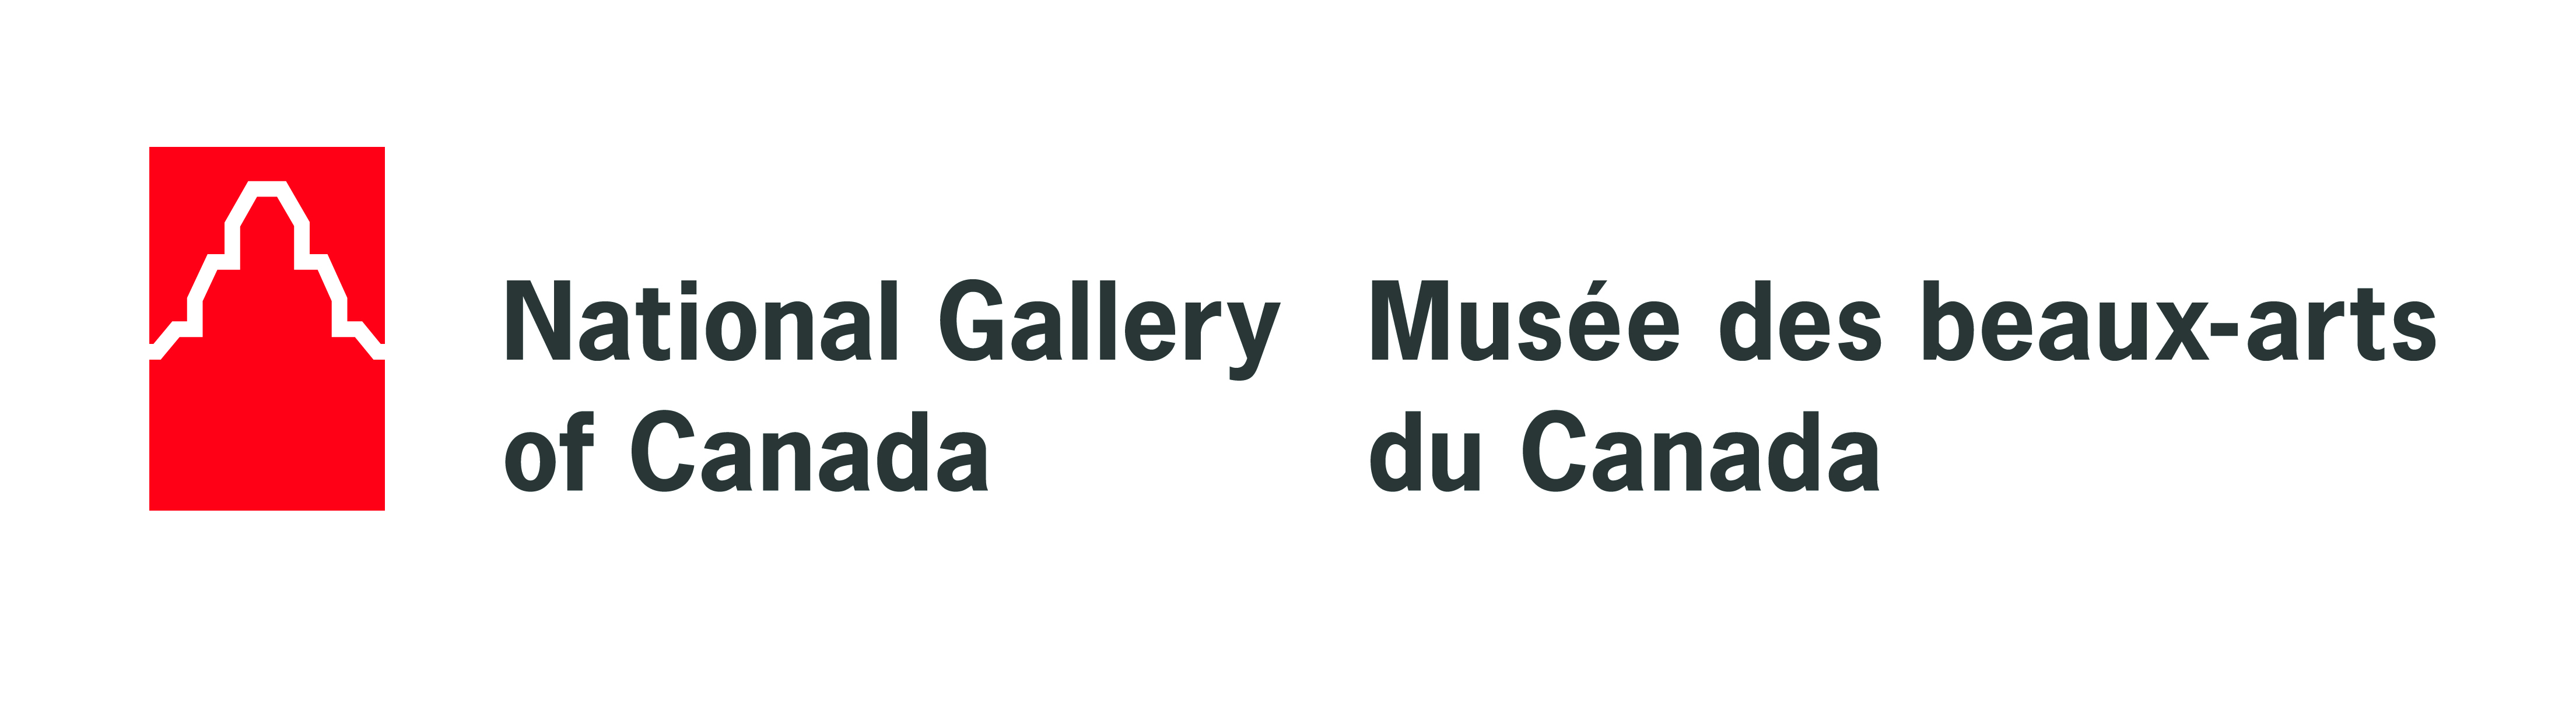 National Gallery of Canada / Musée des beaux-arts du Canada